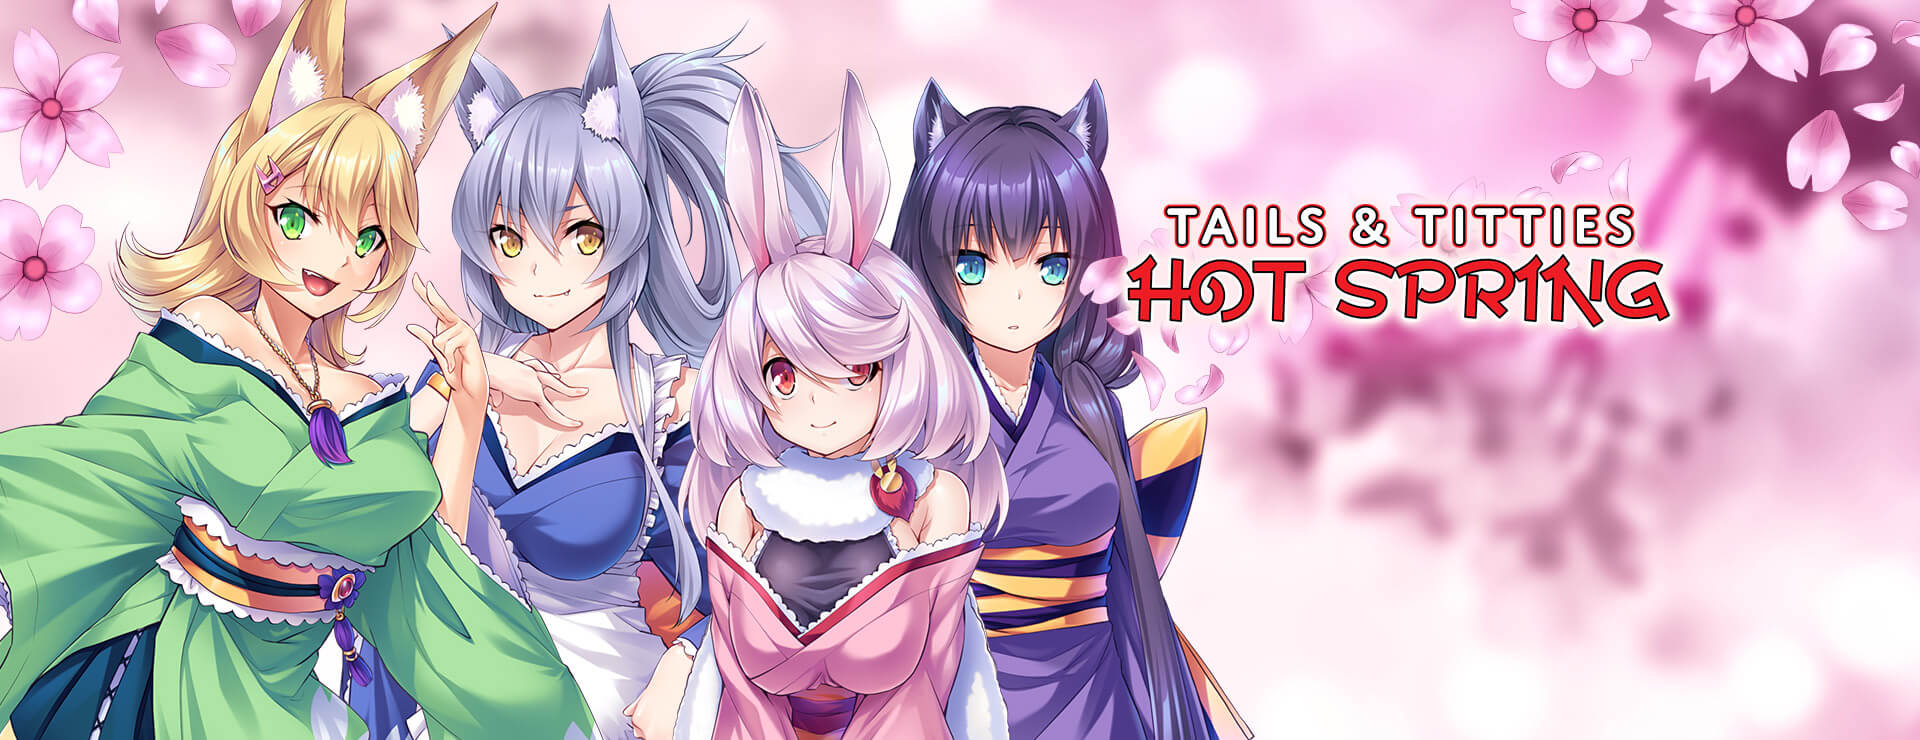 Tails and Titties Hot Spring thumbnail